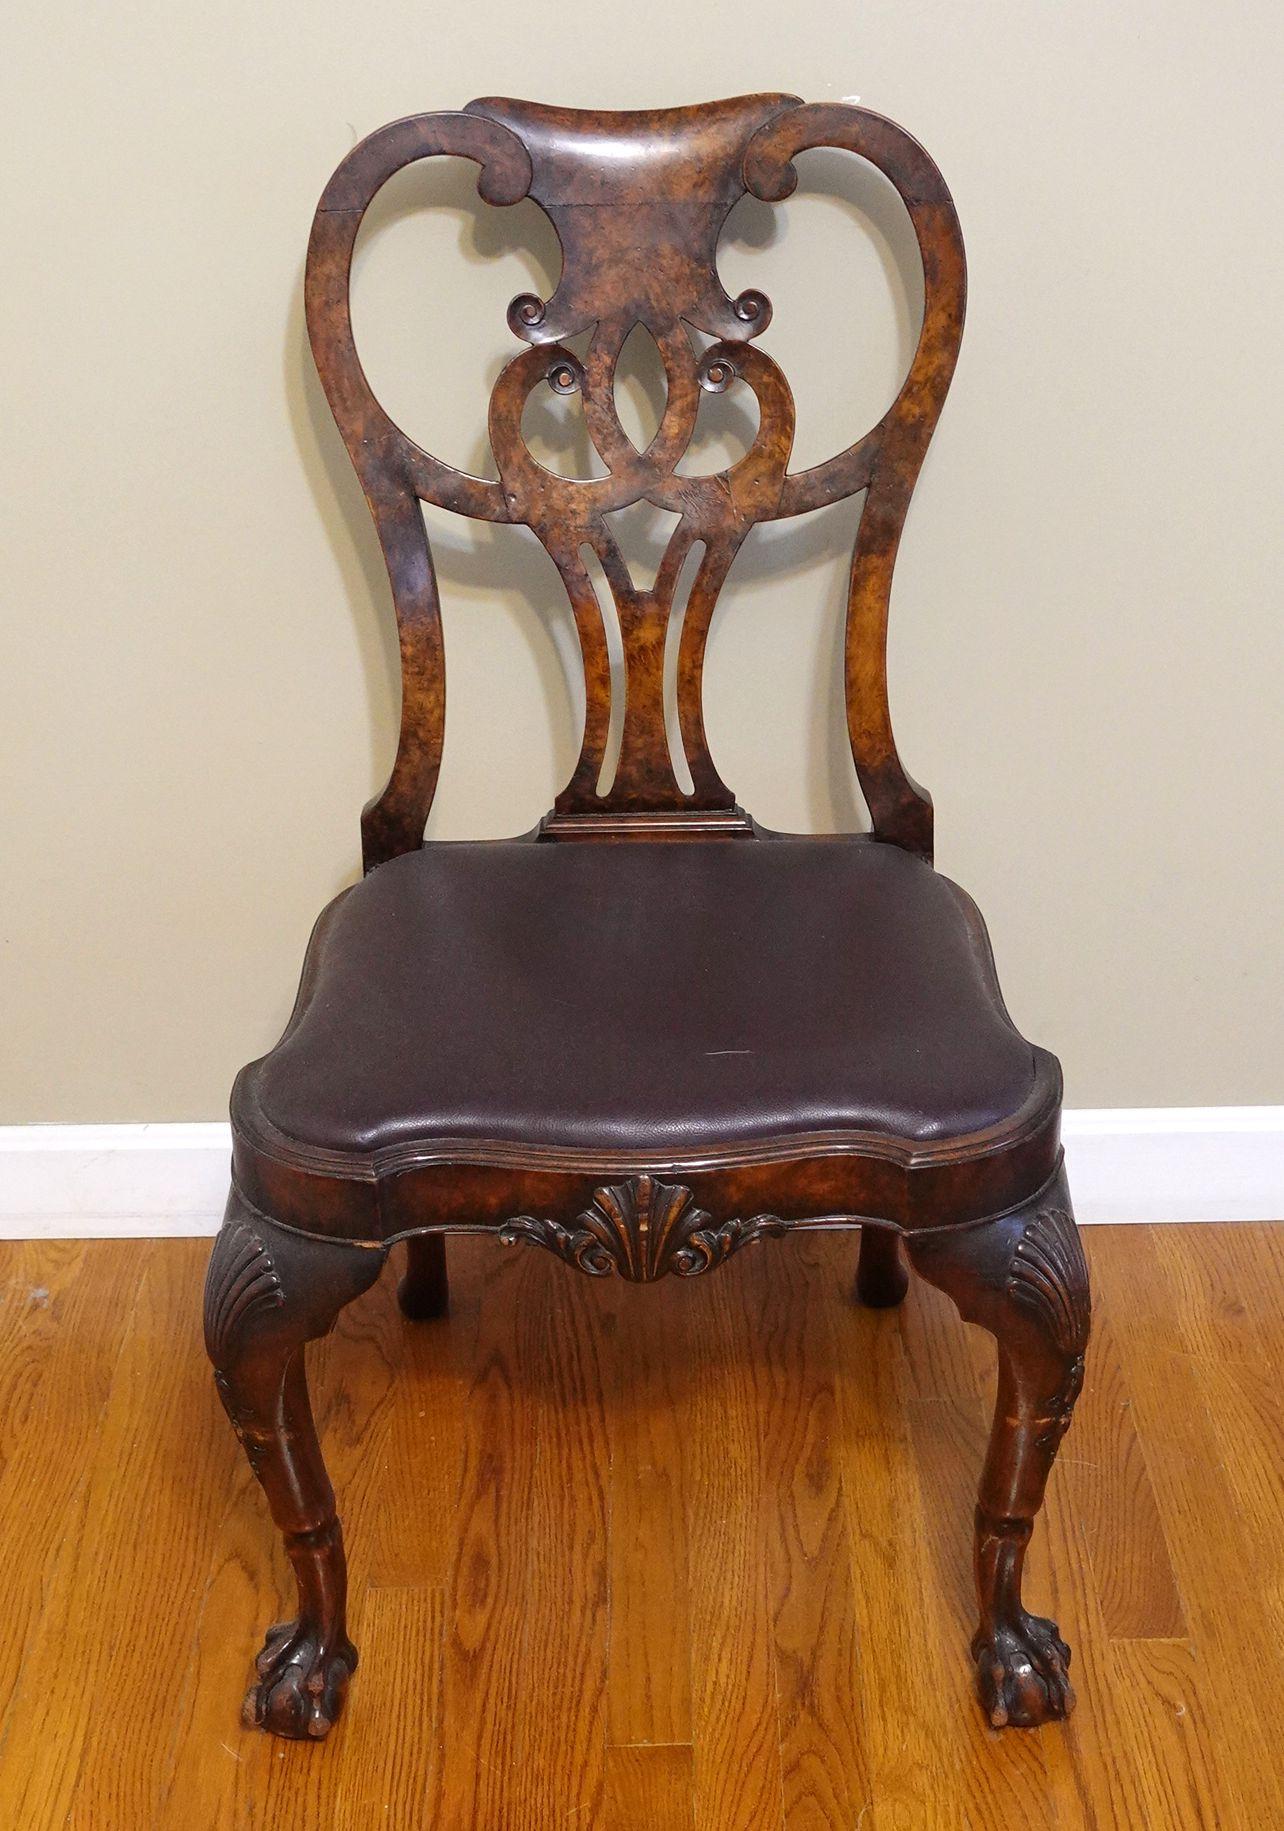 Walnut and Burl Walnut Chippendale Side Chair, having shaped seat on shell carved cabriole legs ending in ball and claw feet, 18th century, height 37 1/2 inches, seat height 18 inches.
